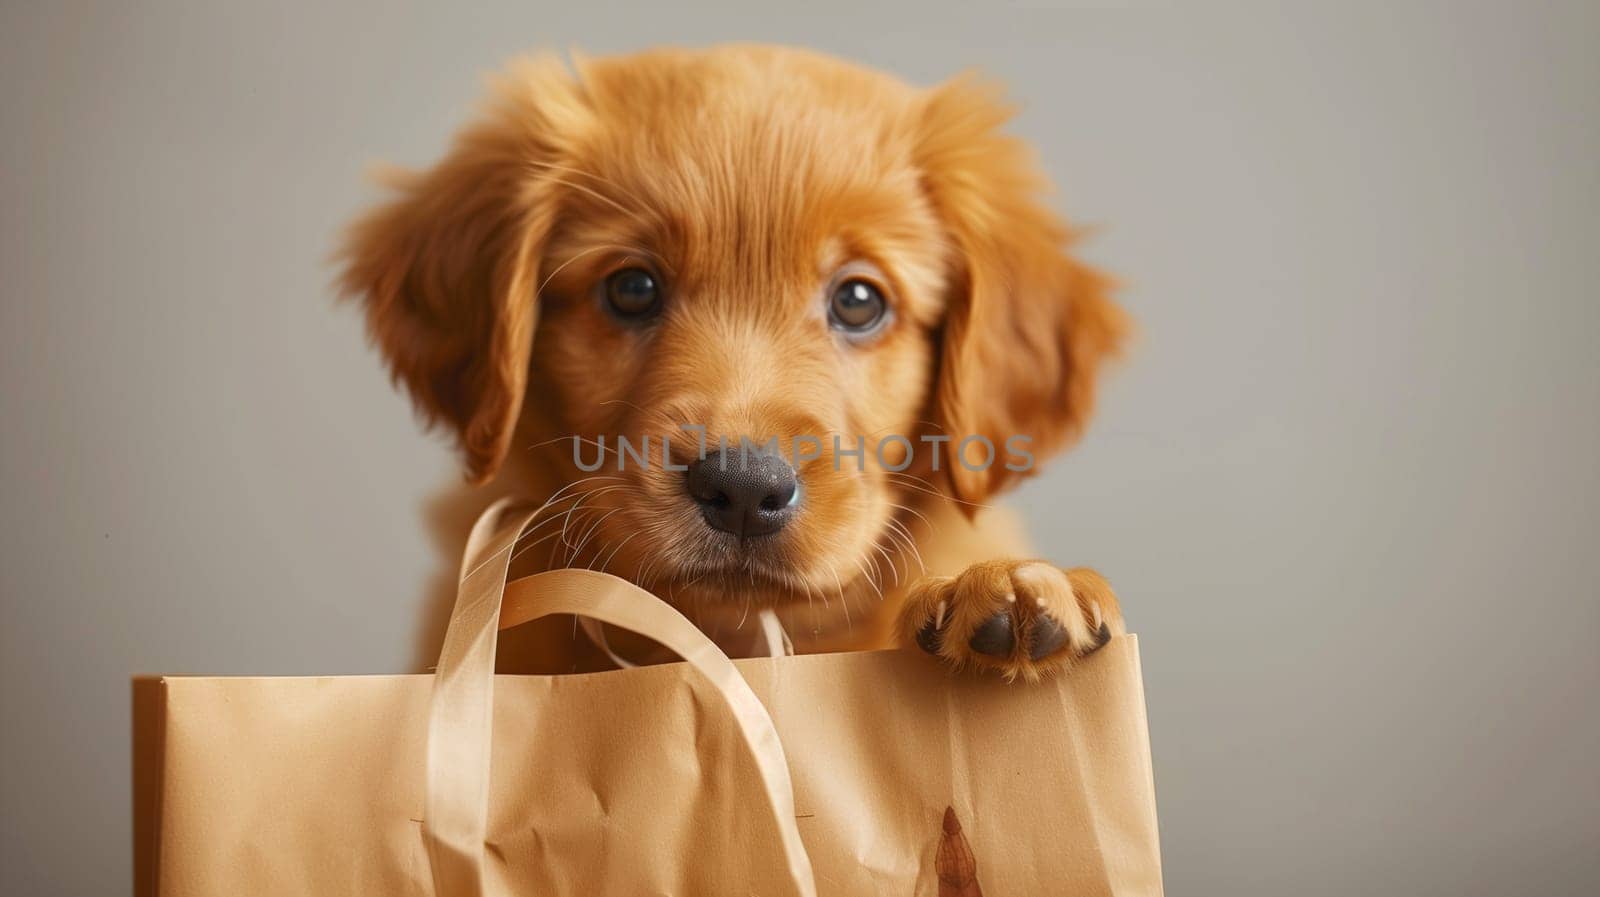 Golden Retriever Puppy Peeking Out From A Gift Bag For Fathers Day by Sd28DimoN_1976